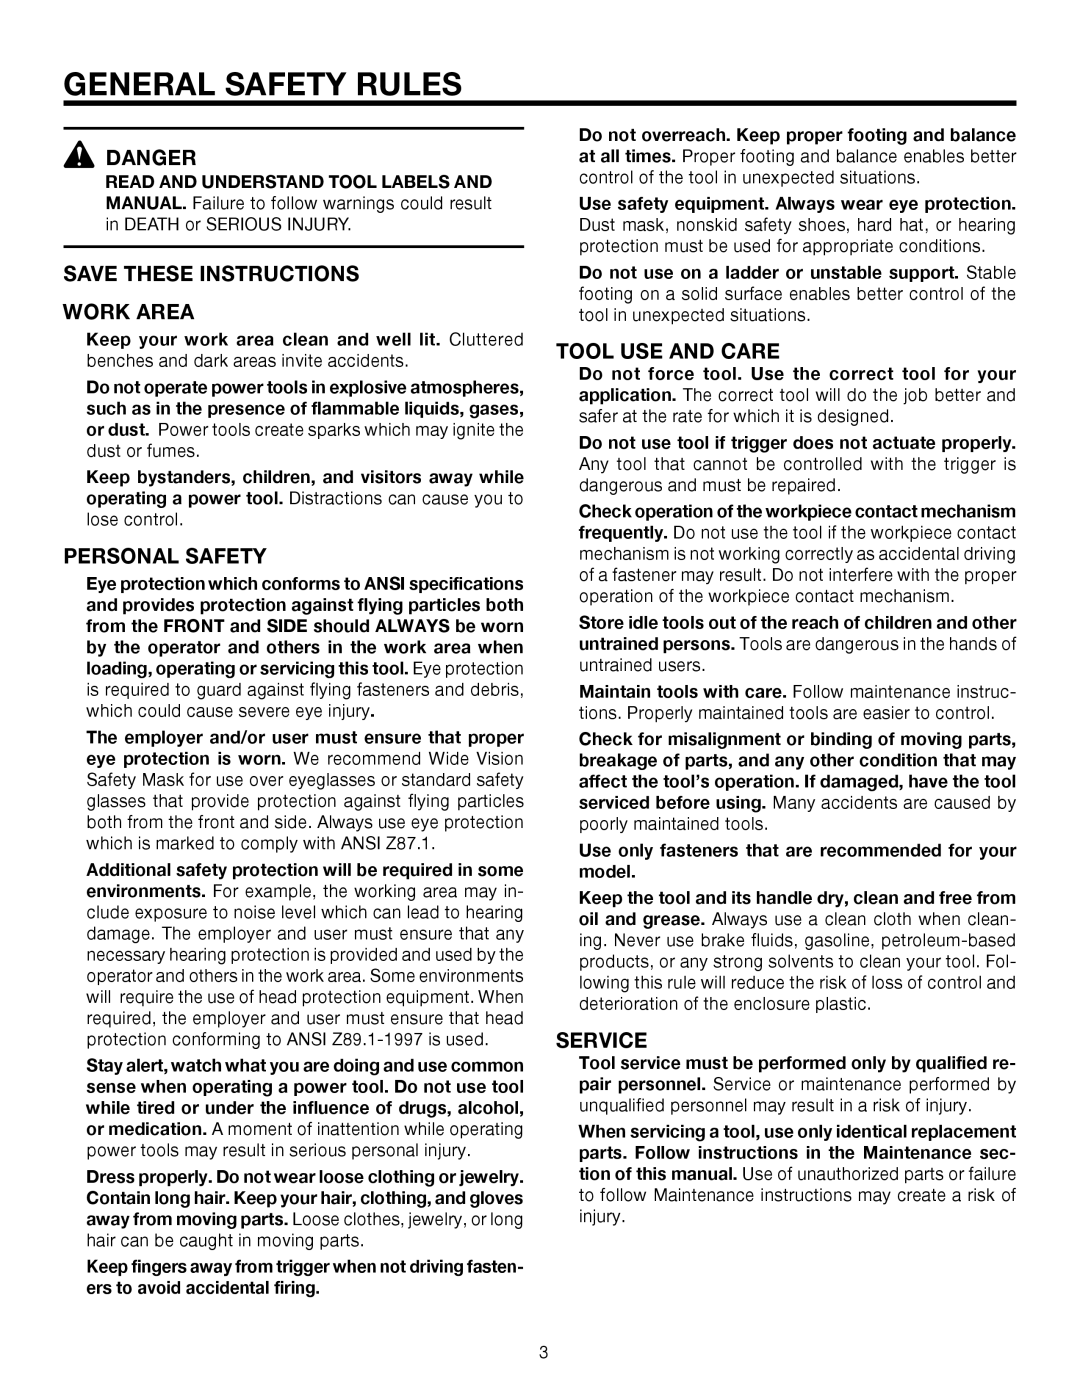 RIDGID R250AFA manual General Safety Rules, Work Area, Personal Safety, Tool USE and Care, Service 